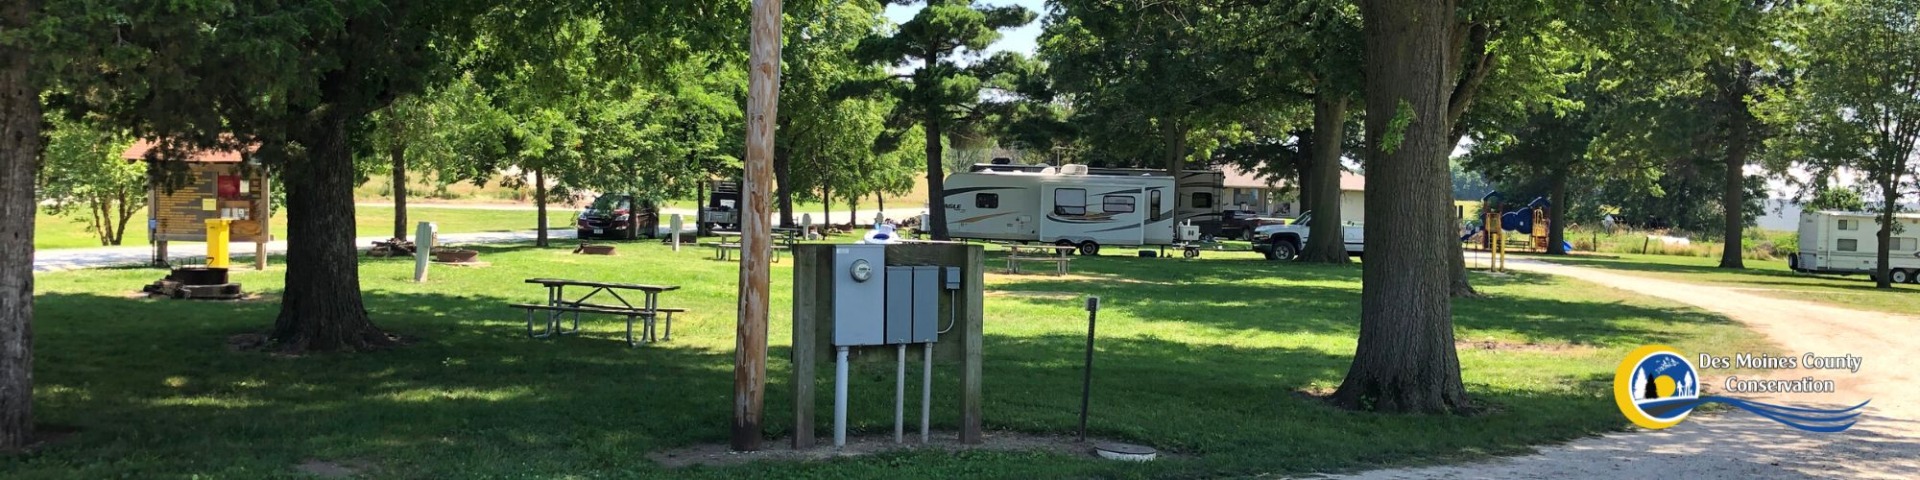 Image of campground